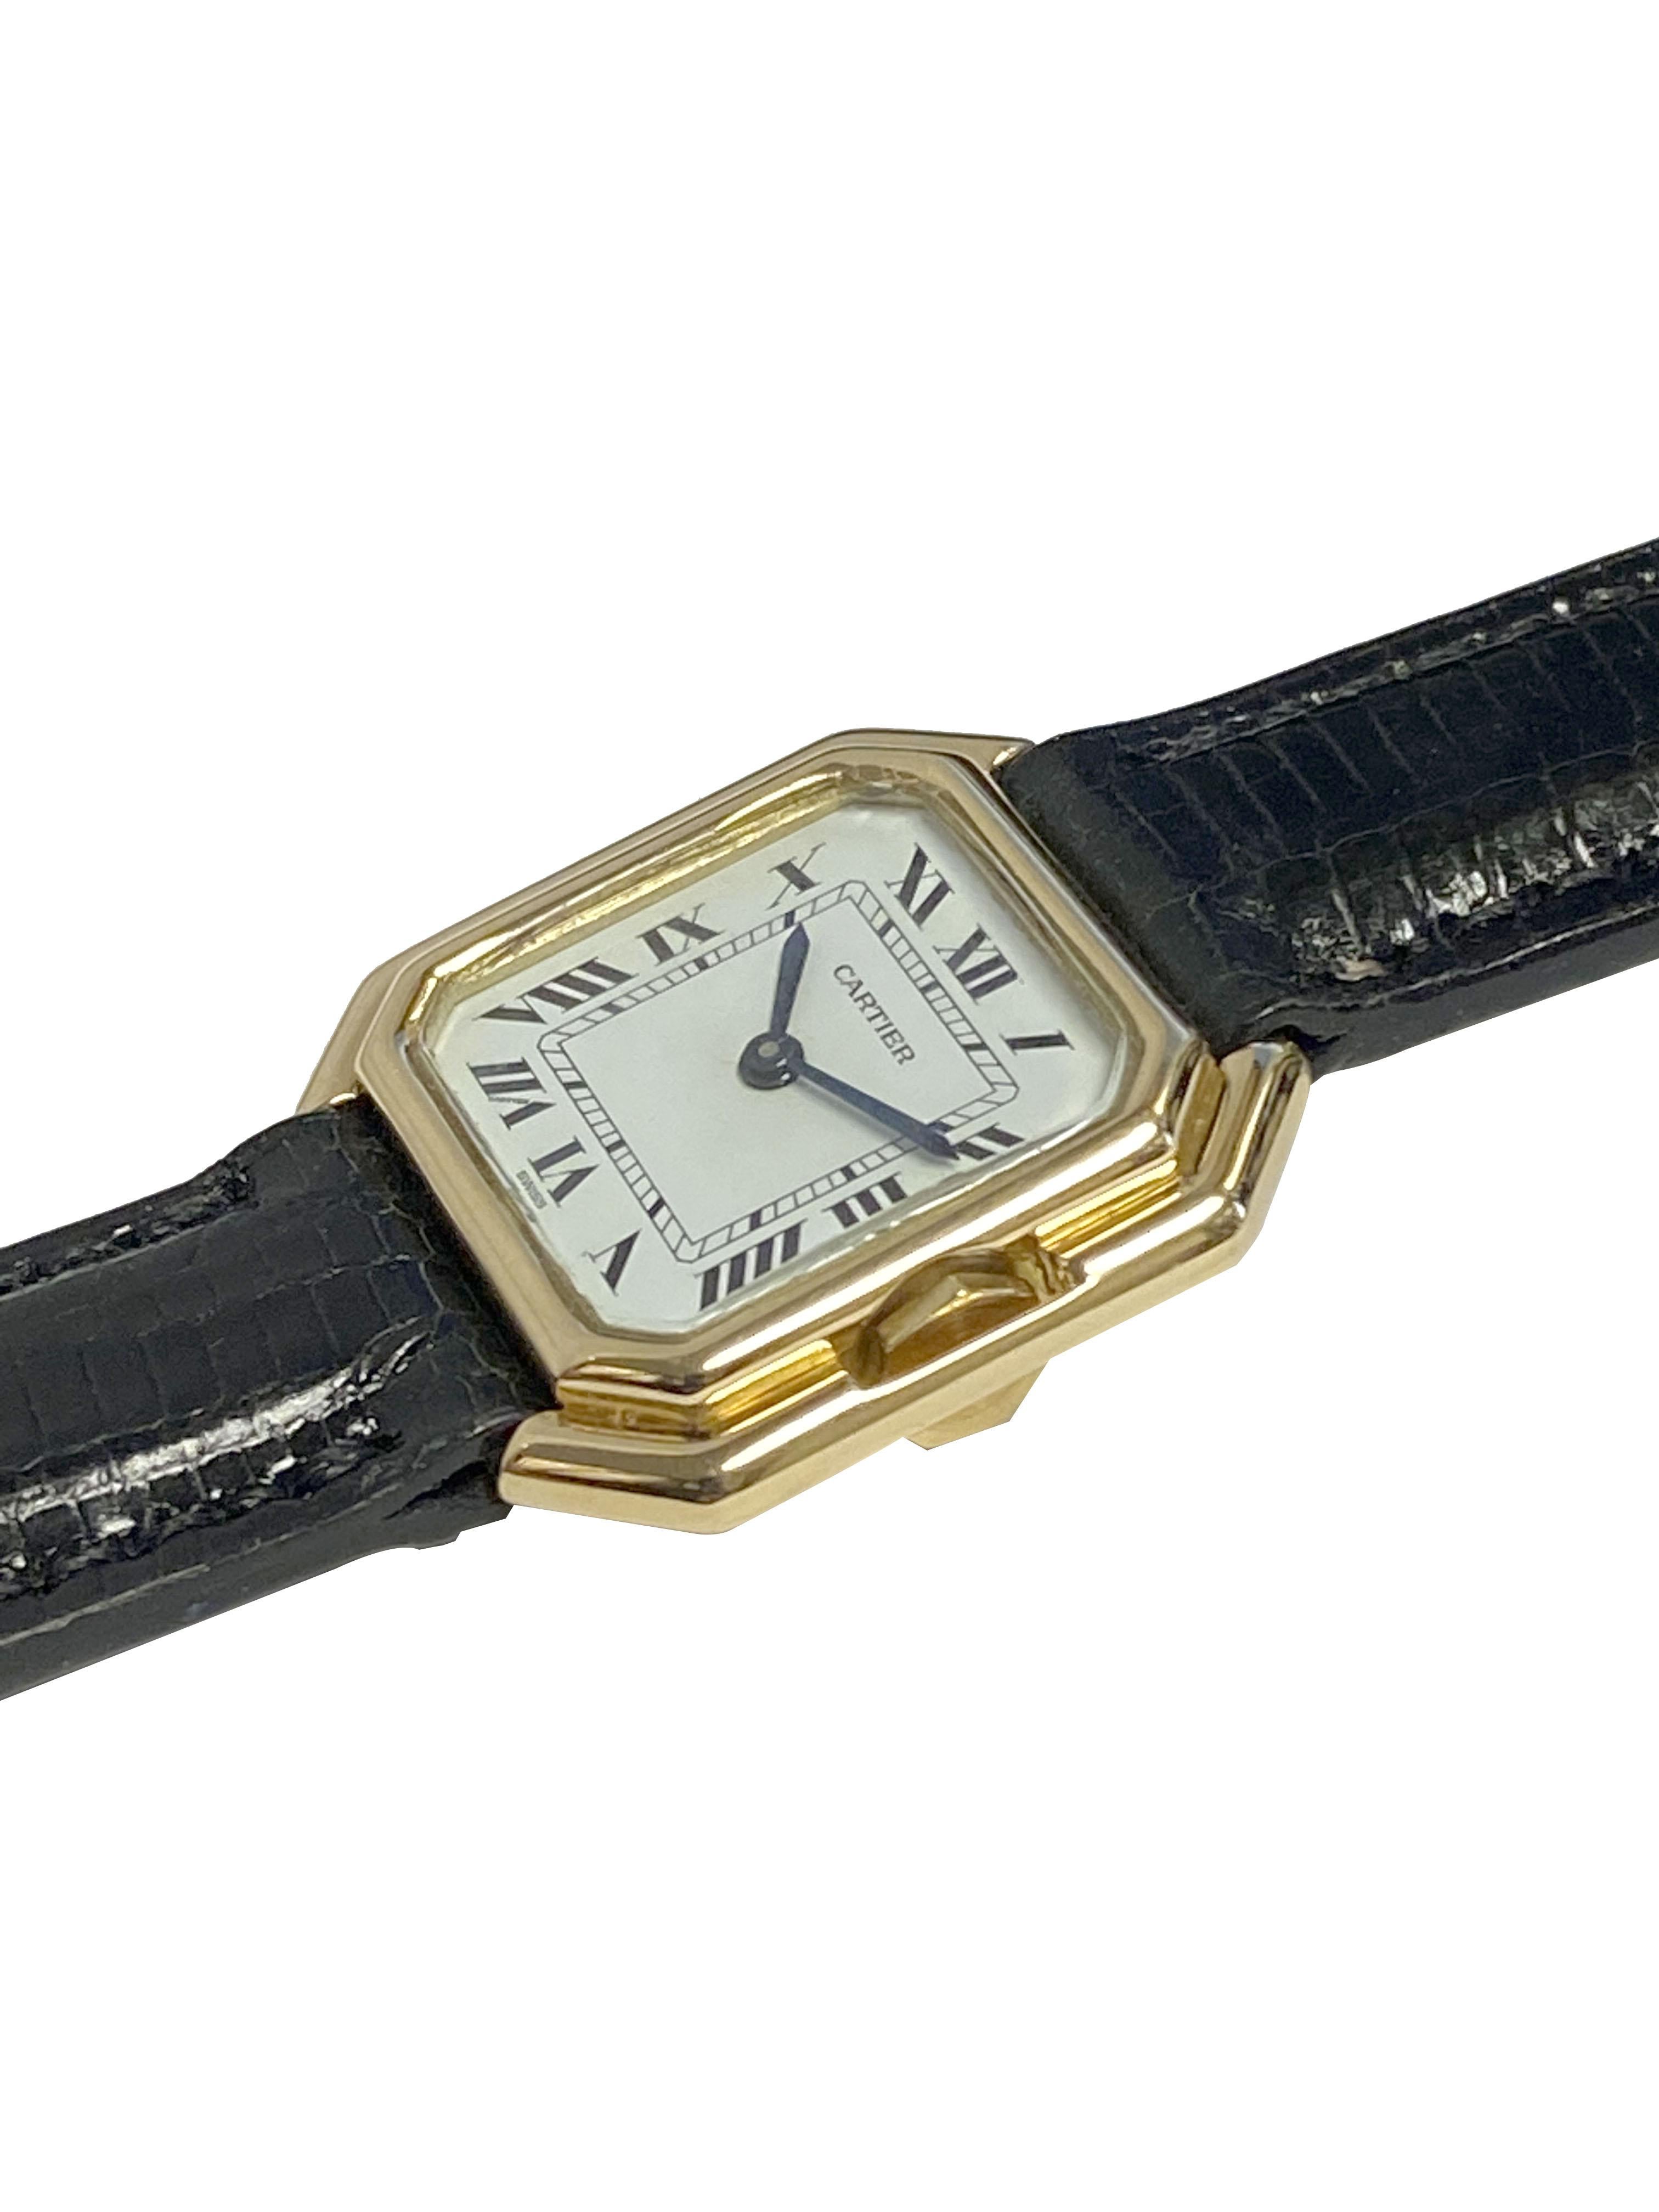 Circa 1970s Cartier Centure Wrist Watch,  24 X 24 M.M. 18k Yellow Gold 3 piece stepped case. Mechanical, manual wind movement, White dial with Black Roman numerals. New Hadley Roma Padded Black Lizard Strap with Cartier Gold Plate Tang buckle, watch